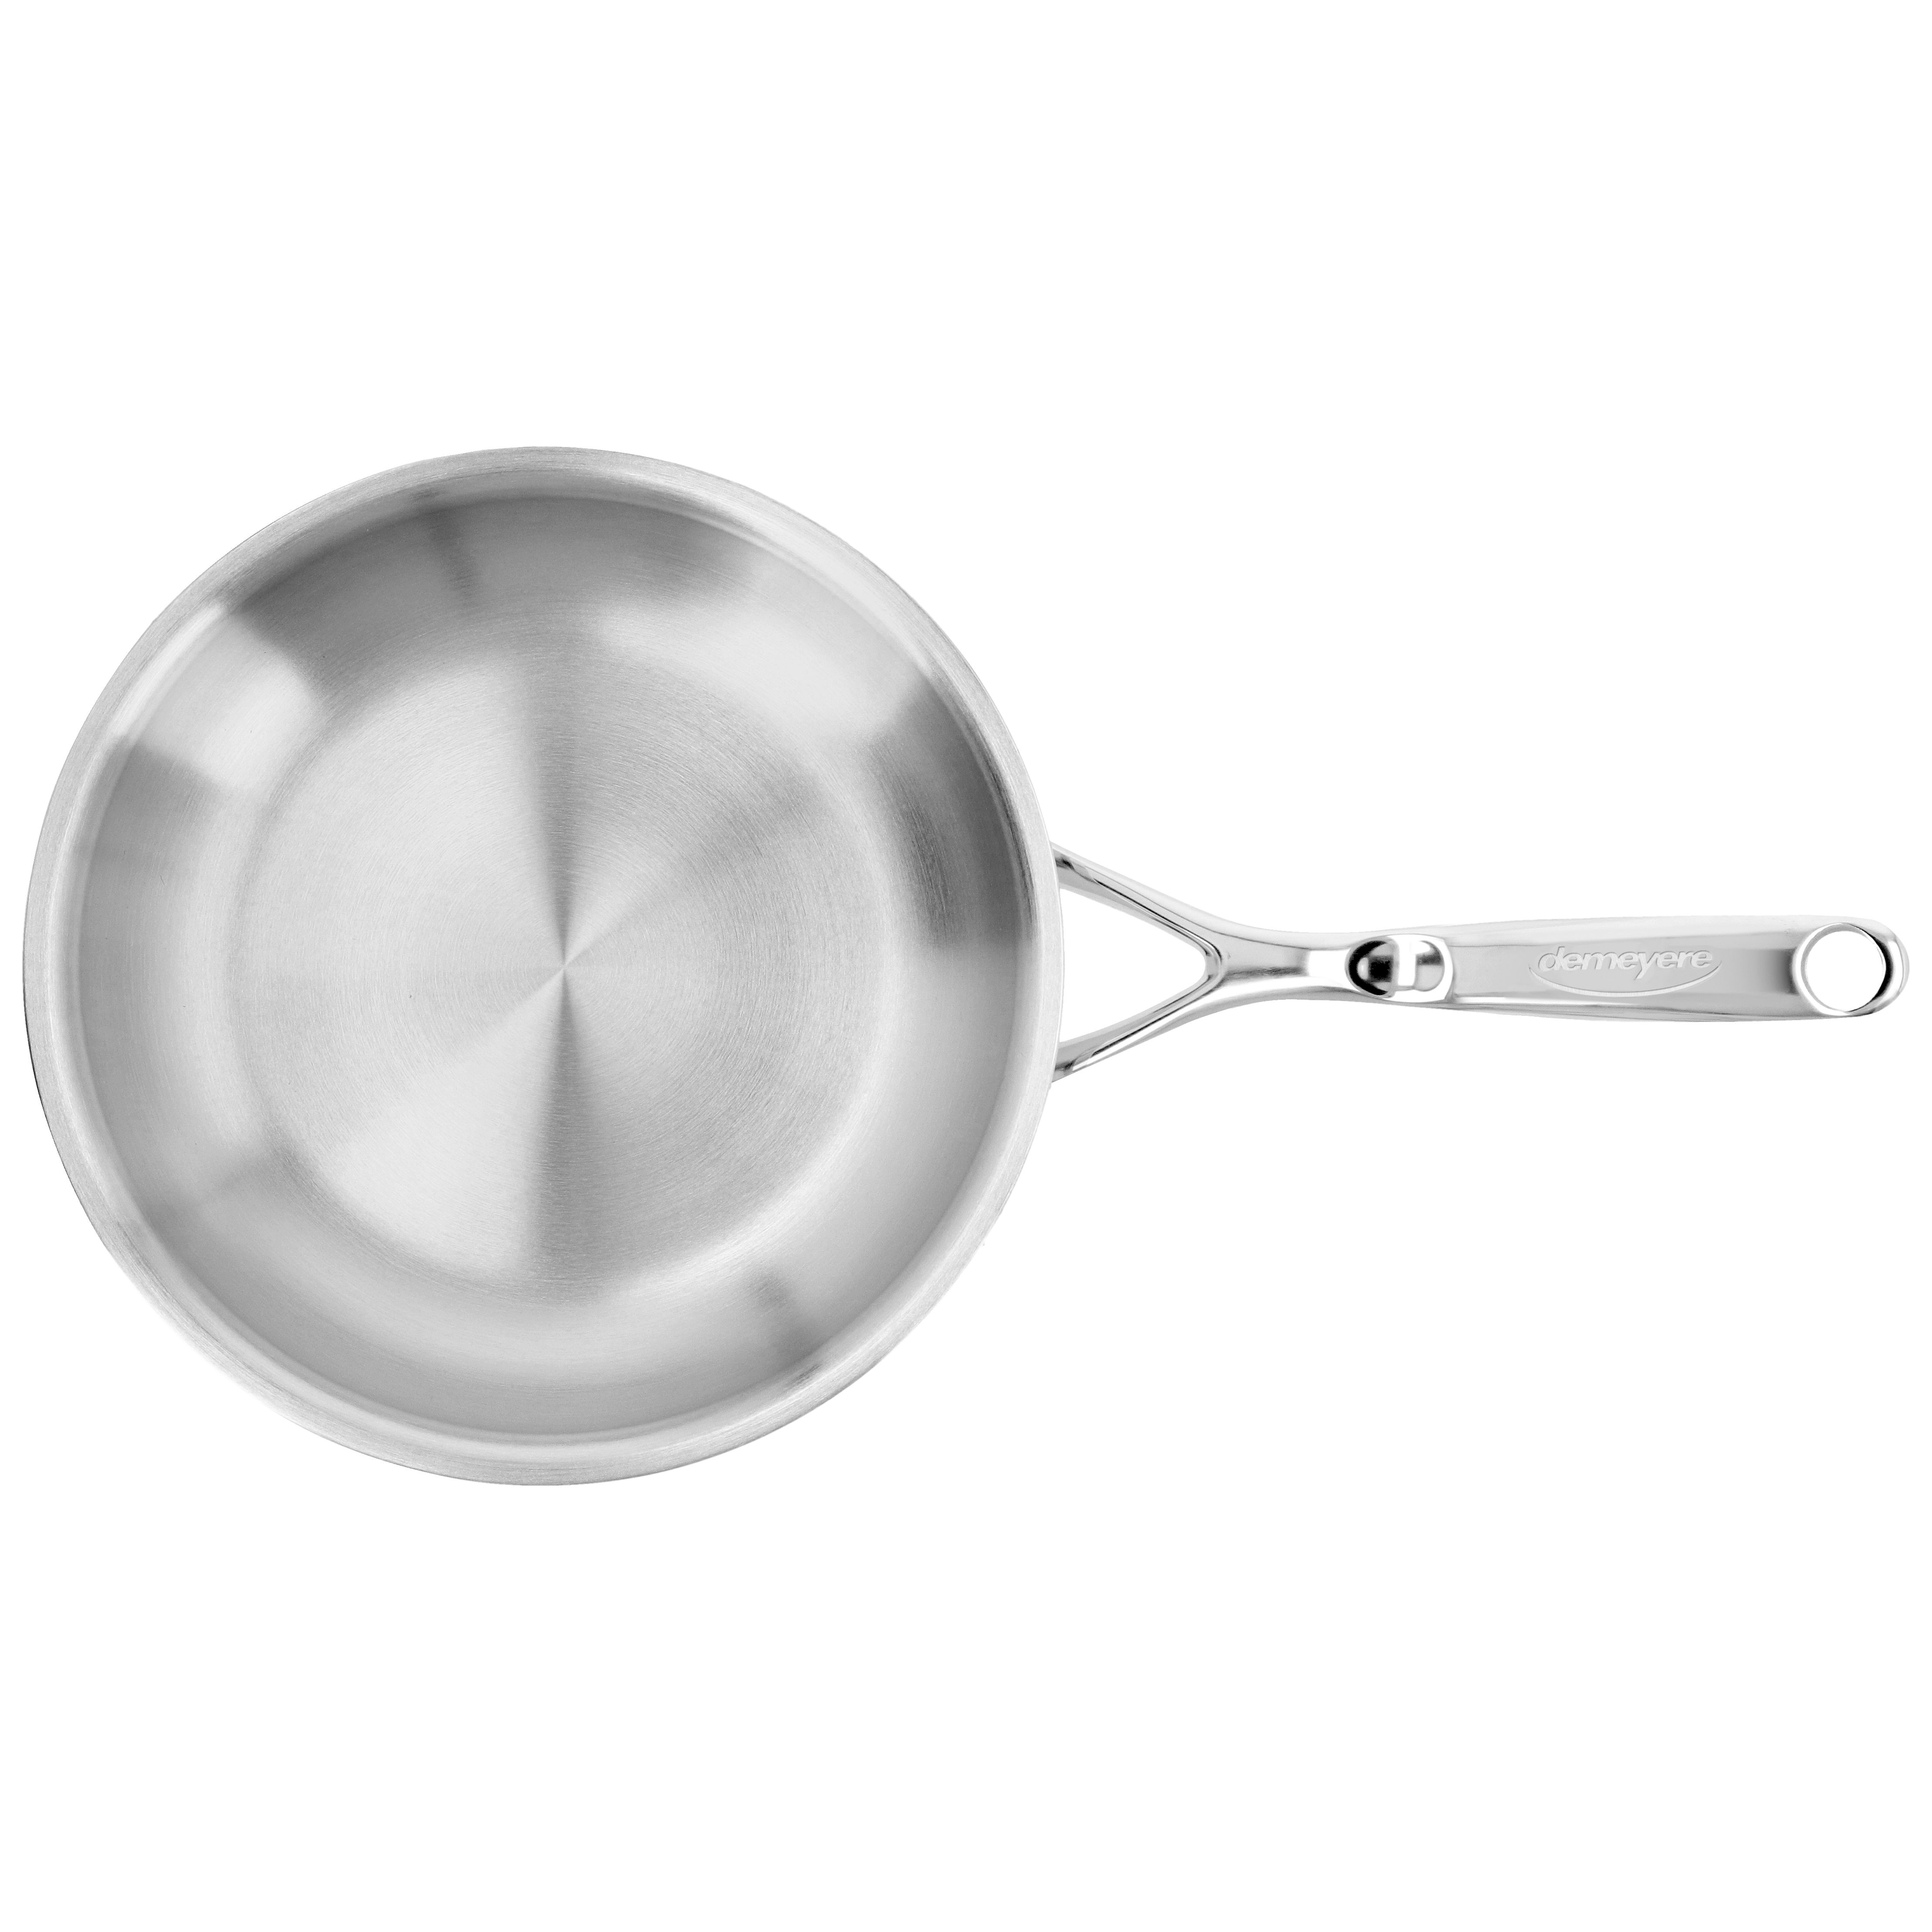 Demeyere Proline Fry Pan - 9.4 Stainless Steel Skillet – Cutlery and More